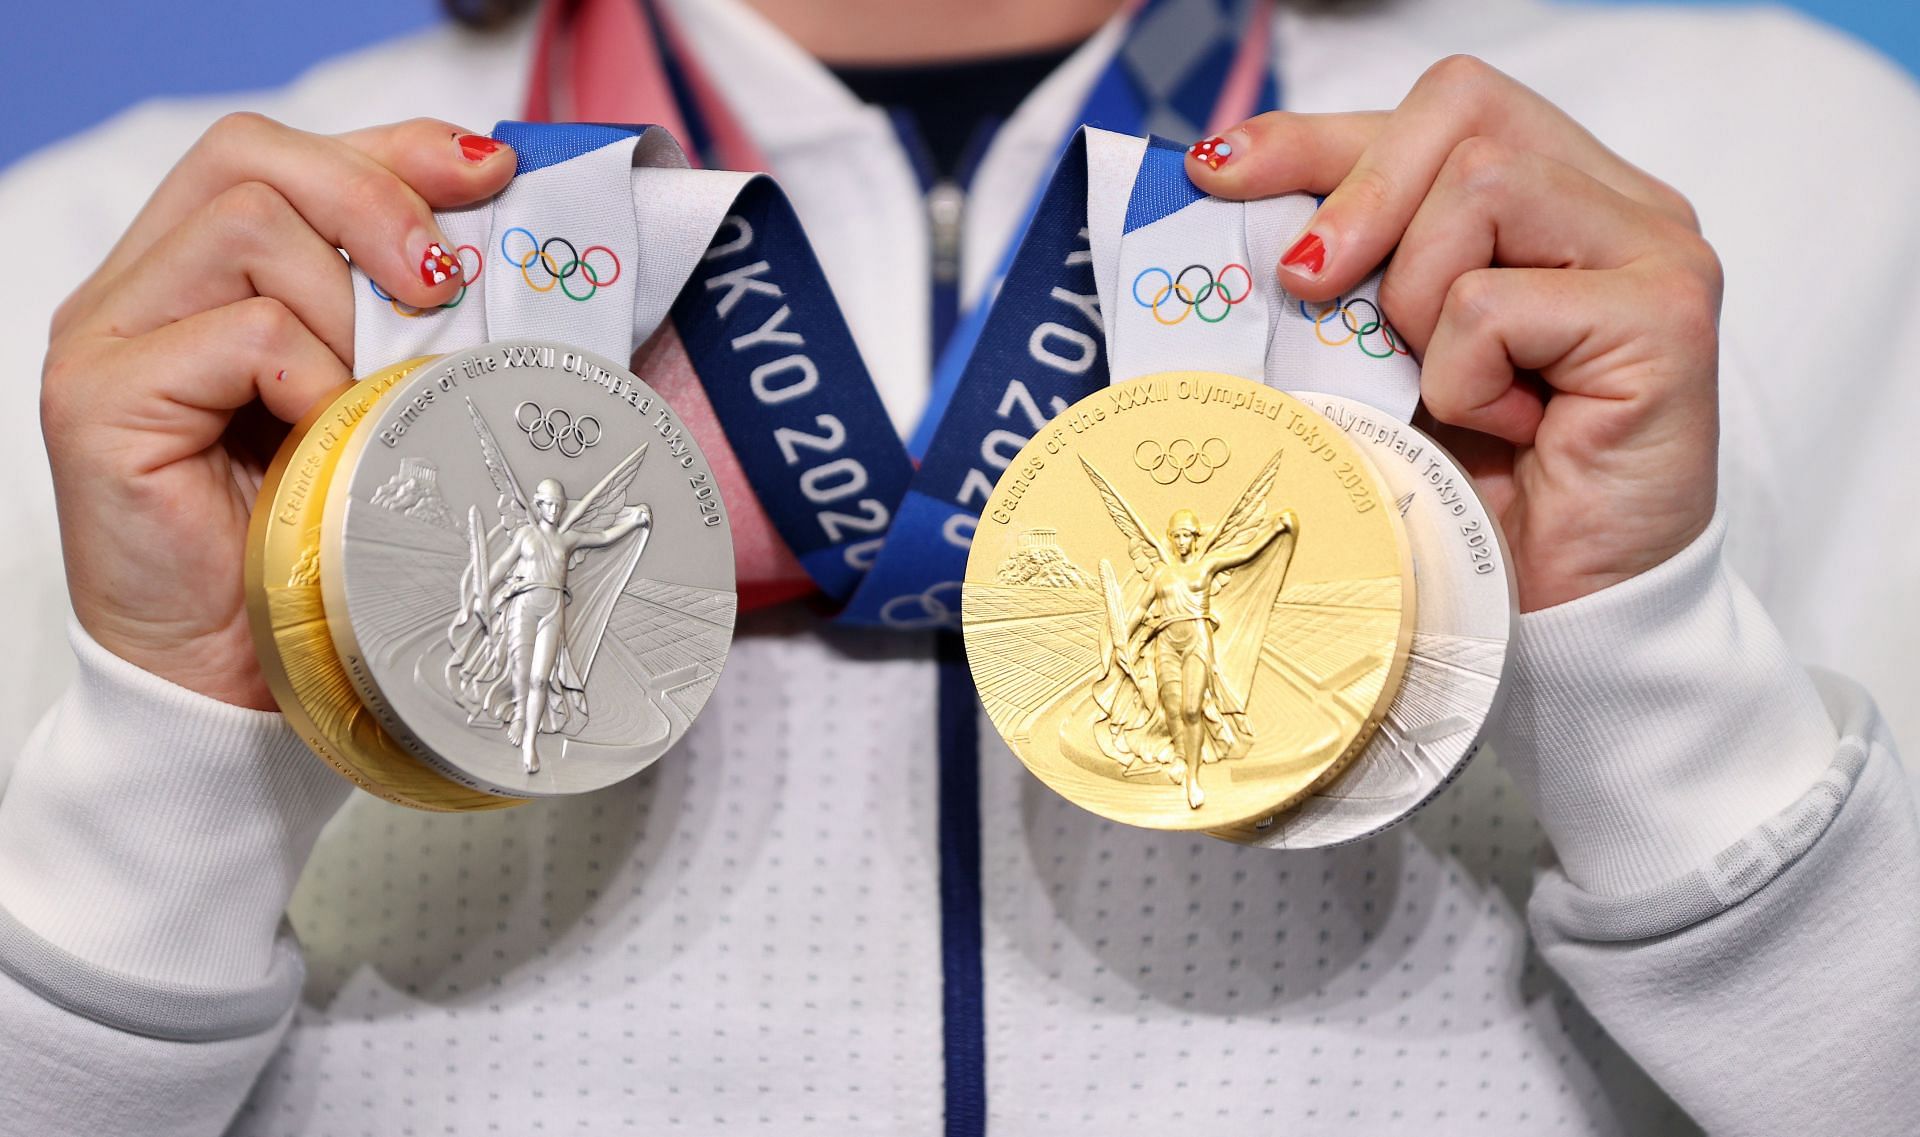 Katie Ledecky of Team USA poses with her two Gold and two Silver medals after a giving a press conference to the media during the Tokyo Olympic Games on July 31, 2021 in Tokyo, Japan. (Photo by Laurence Griffiths/Getty Images)